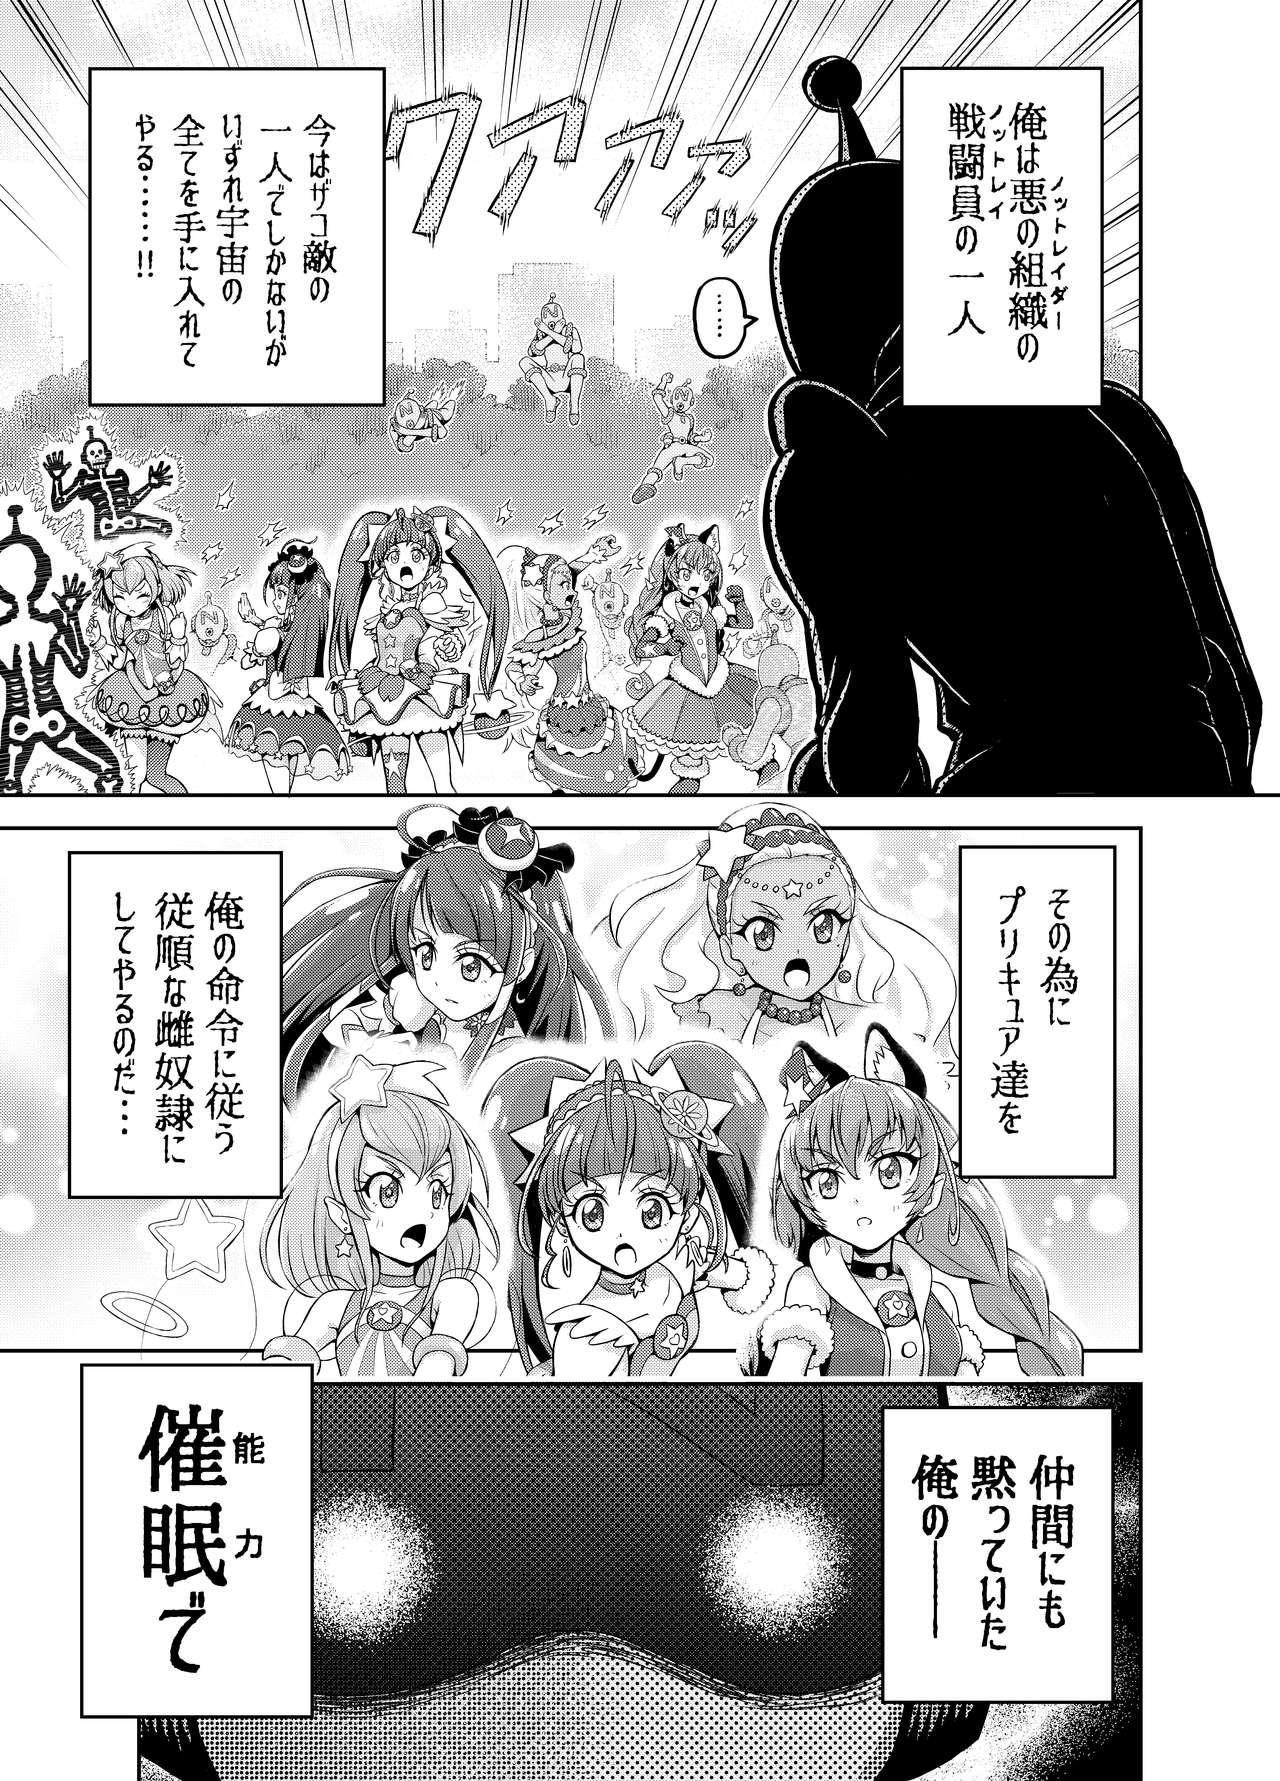 Asian 星アソビ - Star twinkle precure Insertion - Page 2